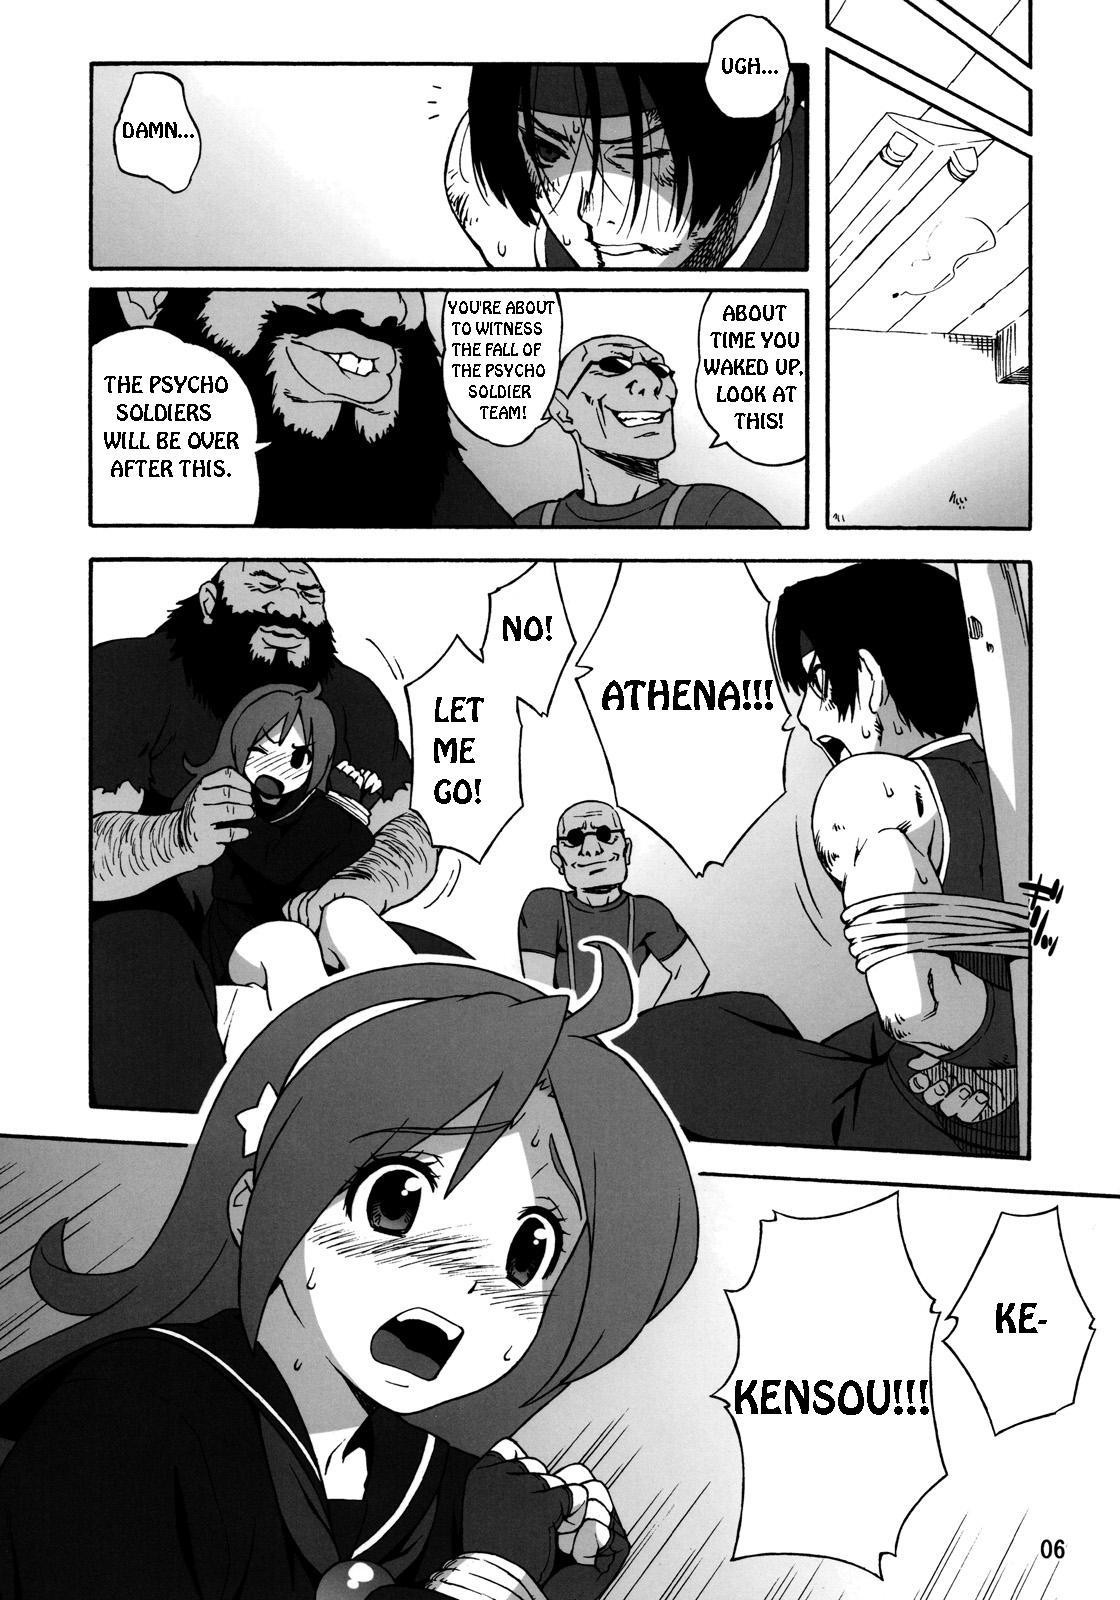 Load A.N.T.R. - King of fighters Footfetish - Page 5